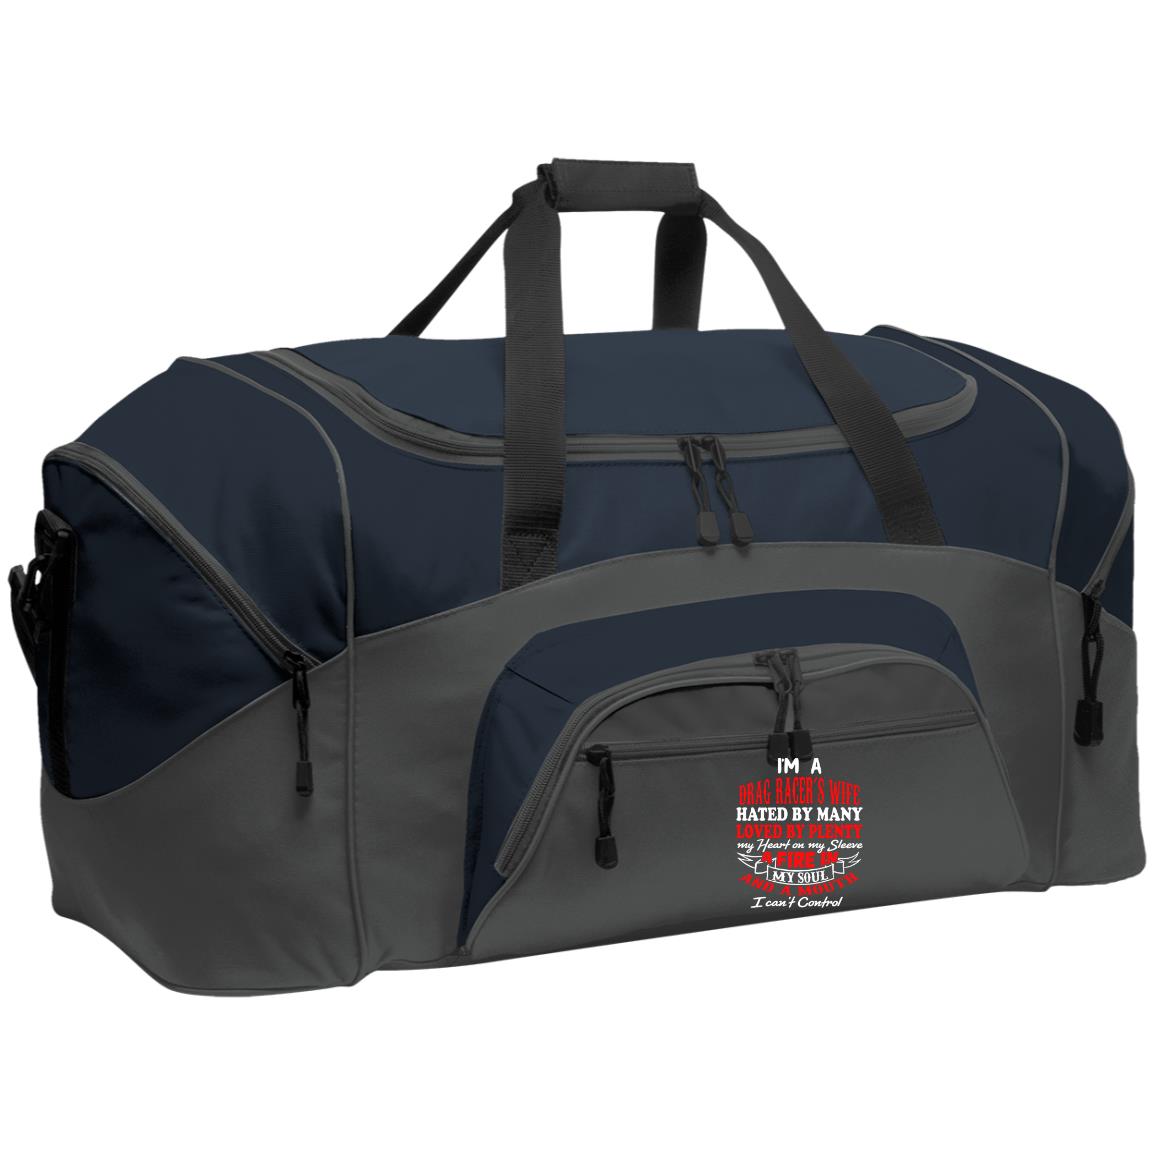 I'm A Drag Racer's Wife Hated By Many Loved By Plenty Colorblock Sport Duffel